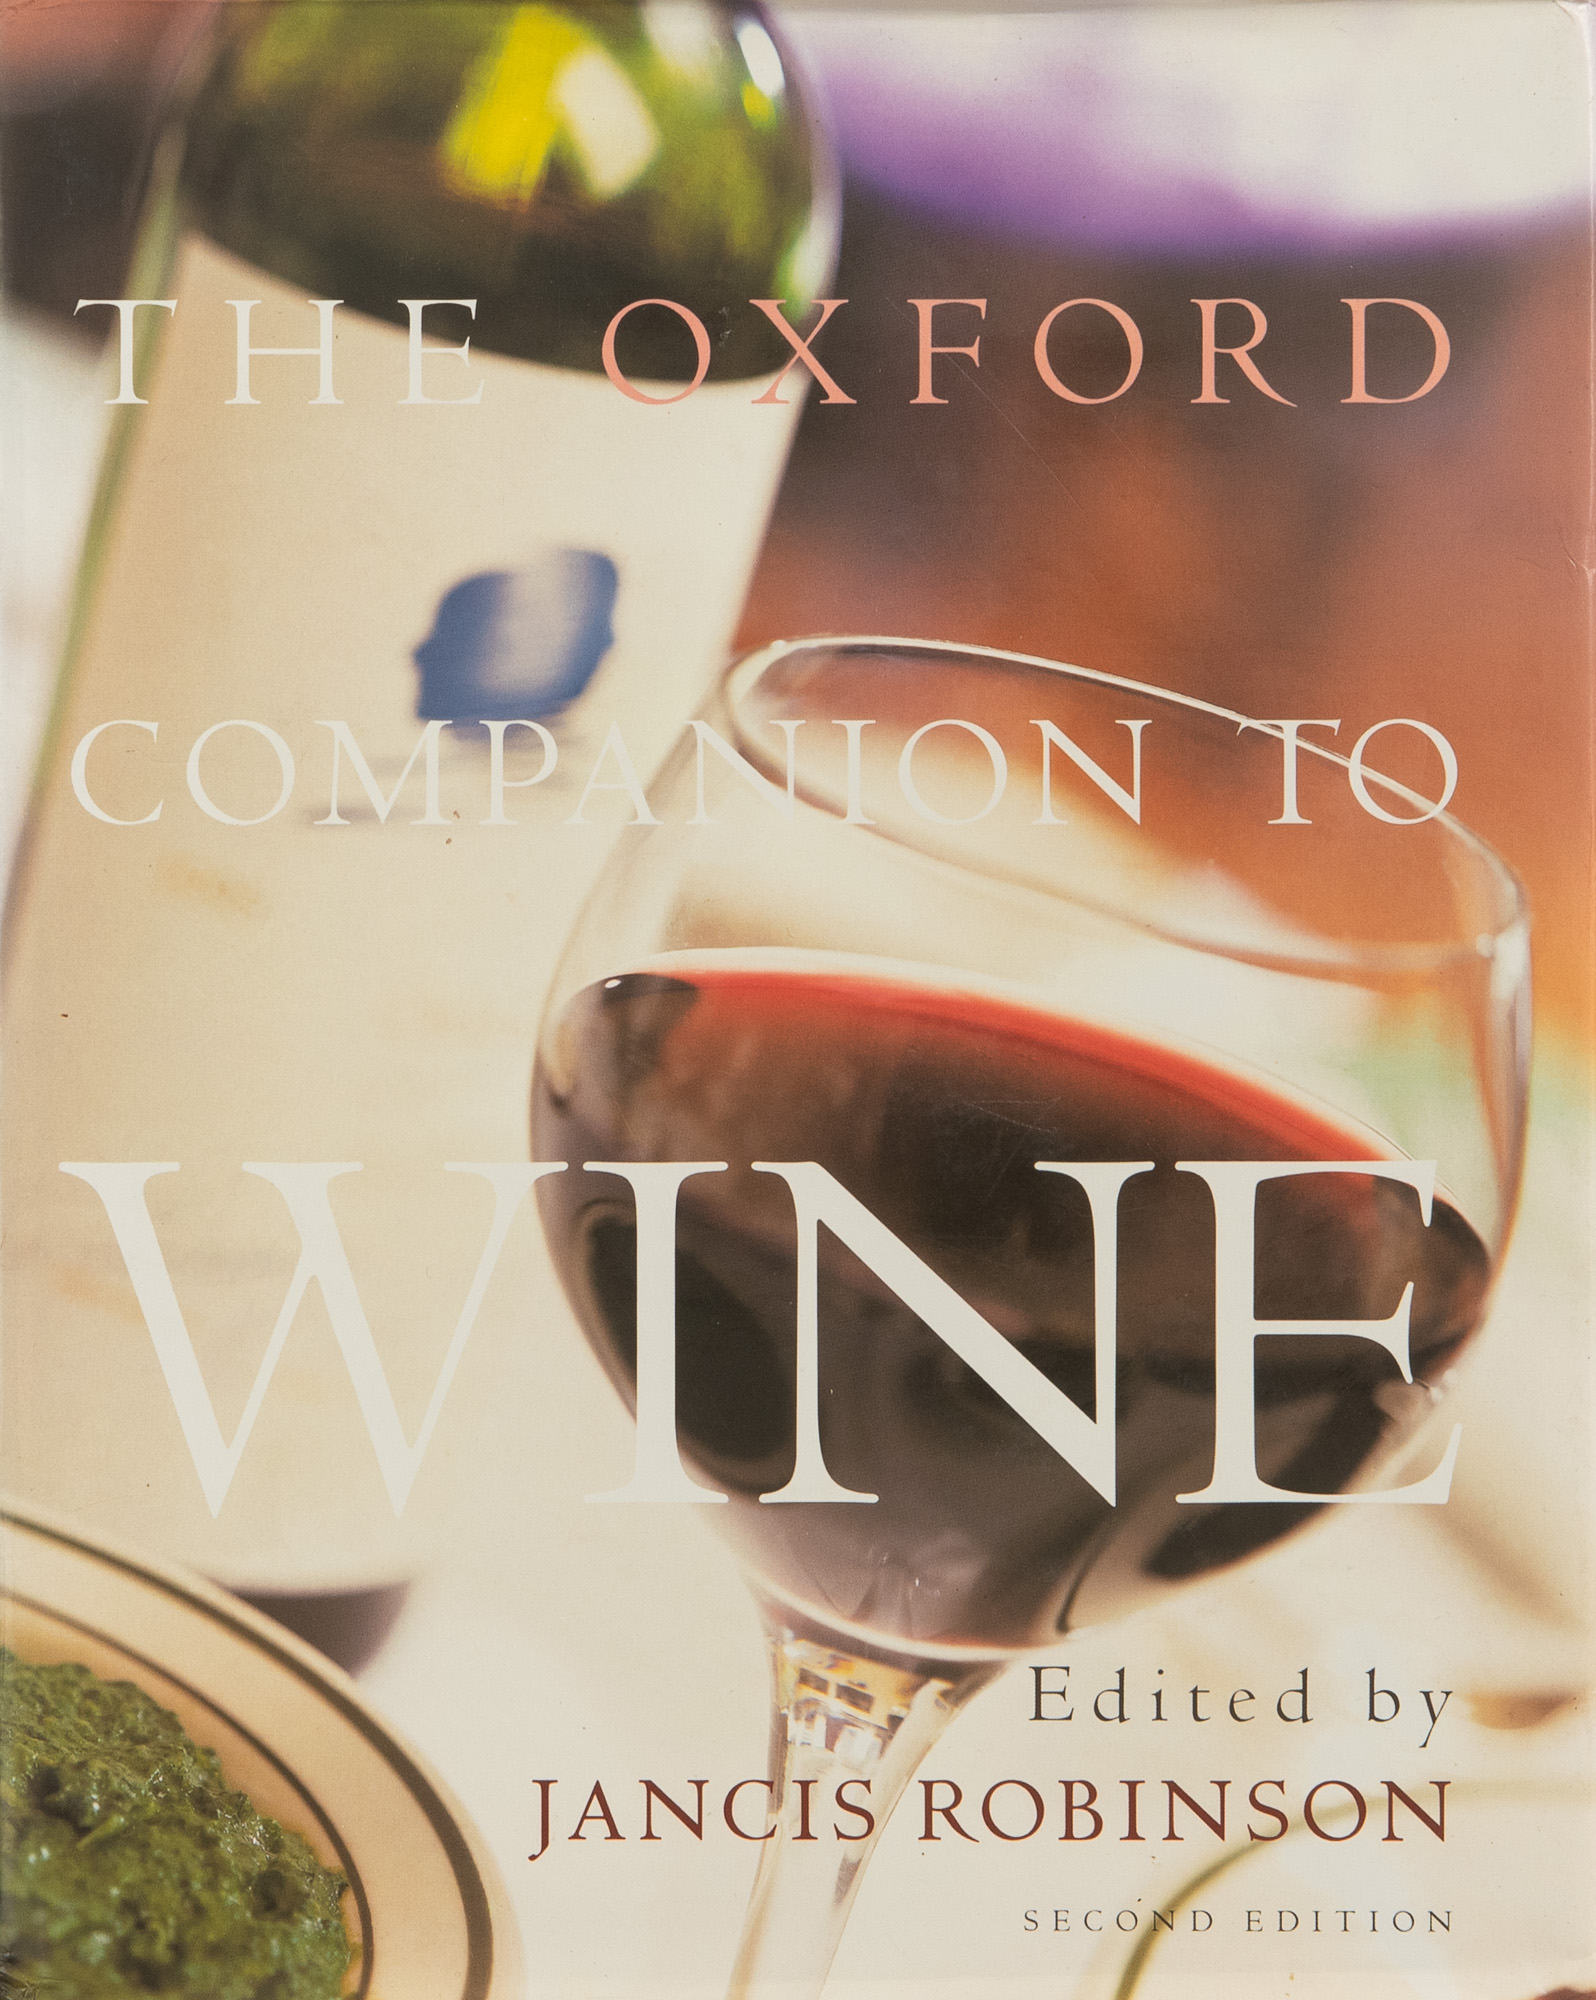 Cover of the Oxford Companion to Wine in the Asif Library